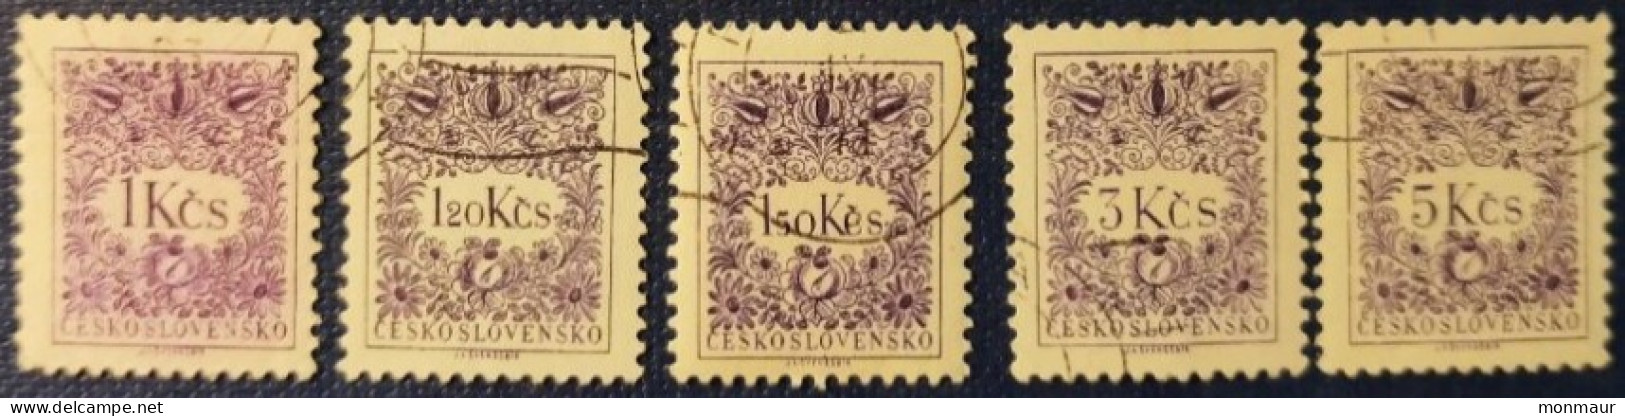 CECOSLOVACCHIA 1963 TIMBRE TAXE Yt 97-98-99-100-101 DENT. 11 1/2 - Postage Due